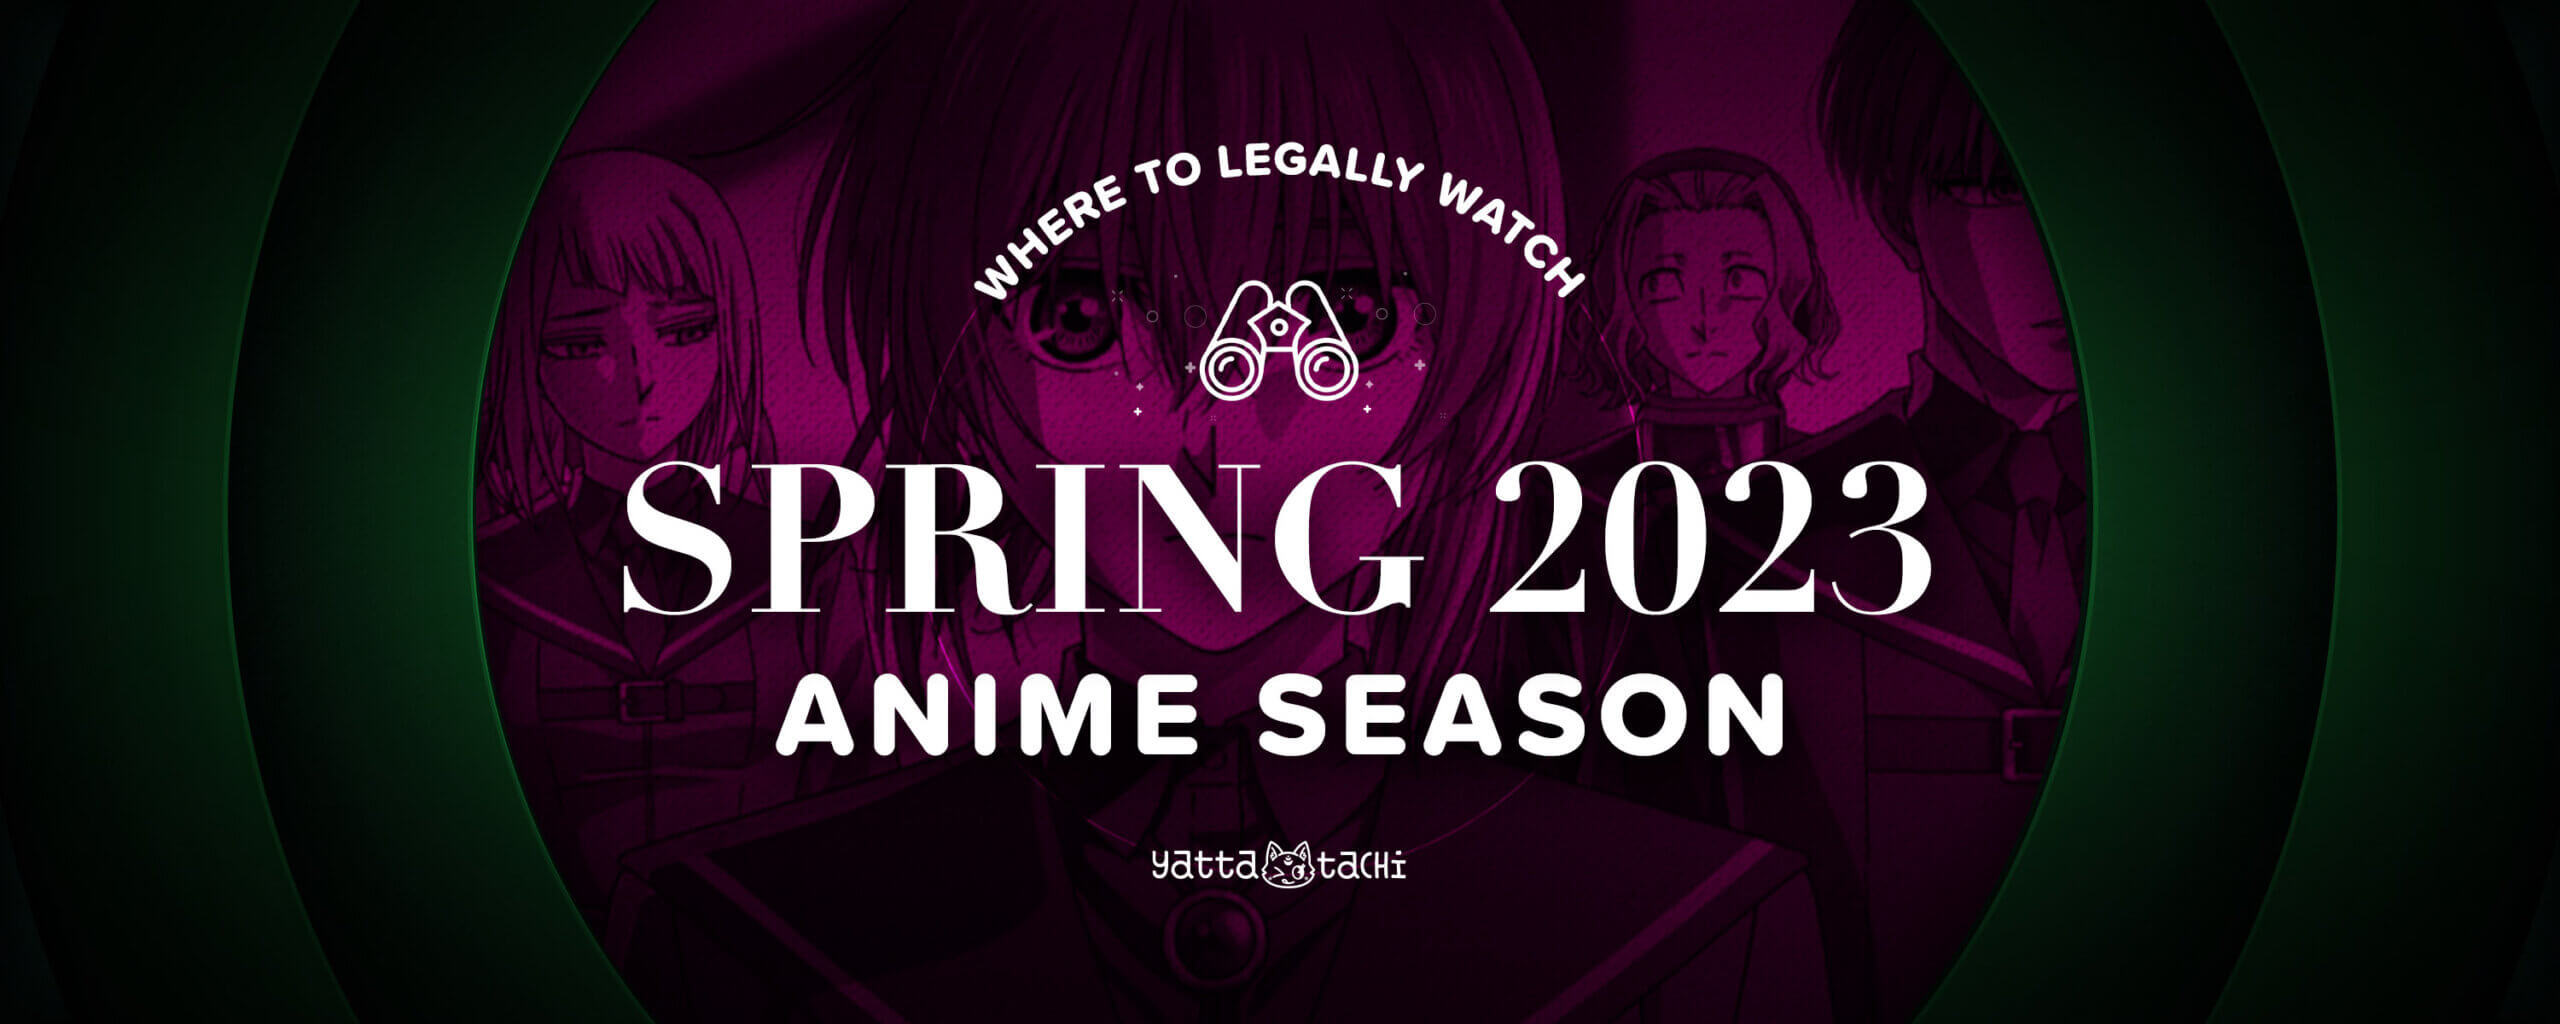 Top 10 Romance Anime To Watch In Spring 2023 - YouTube